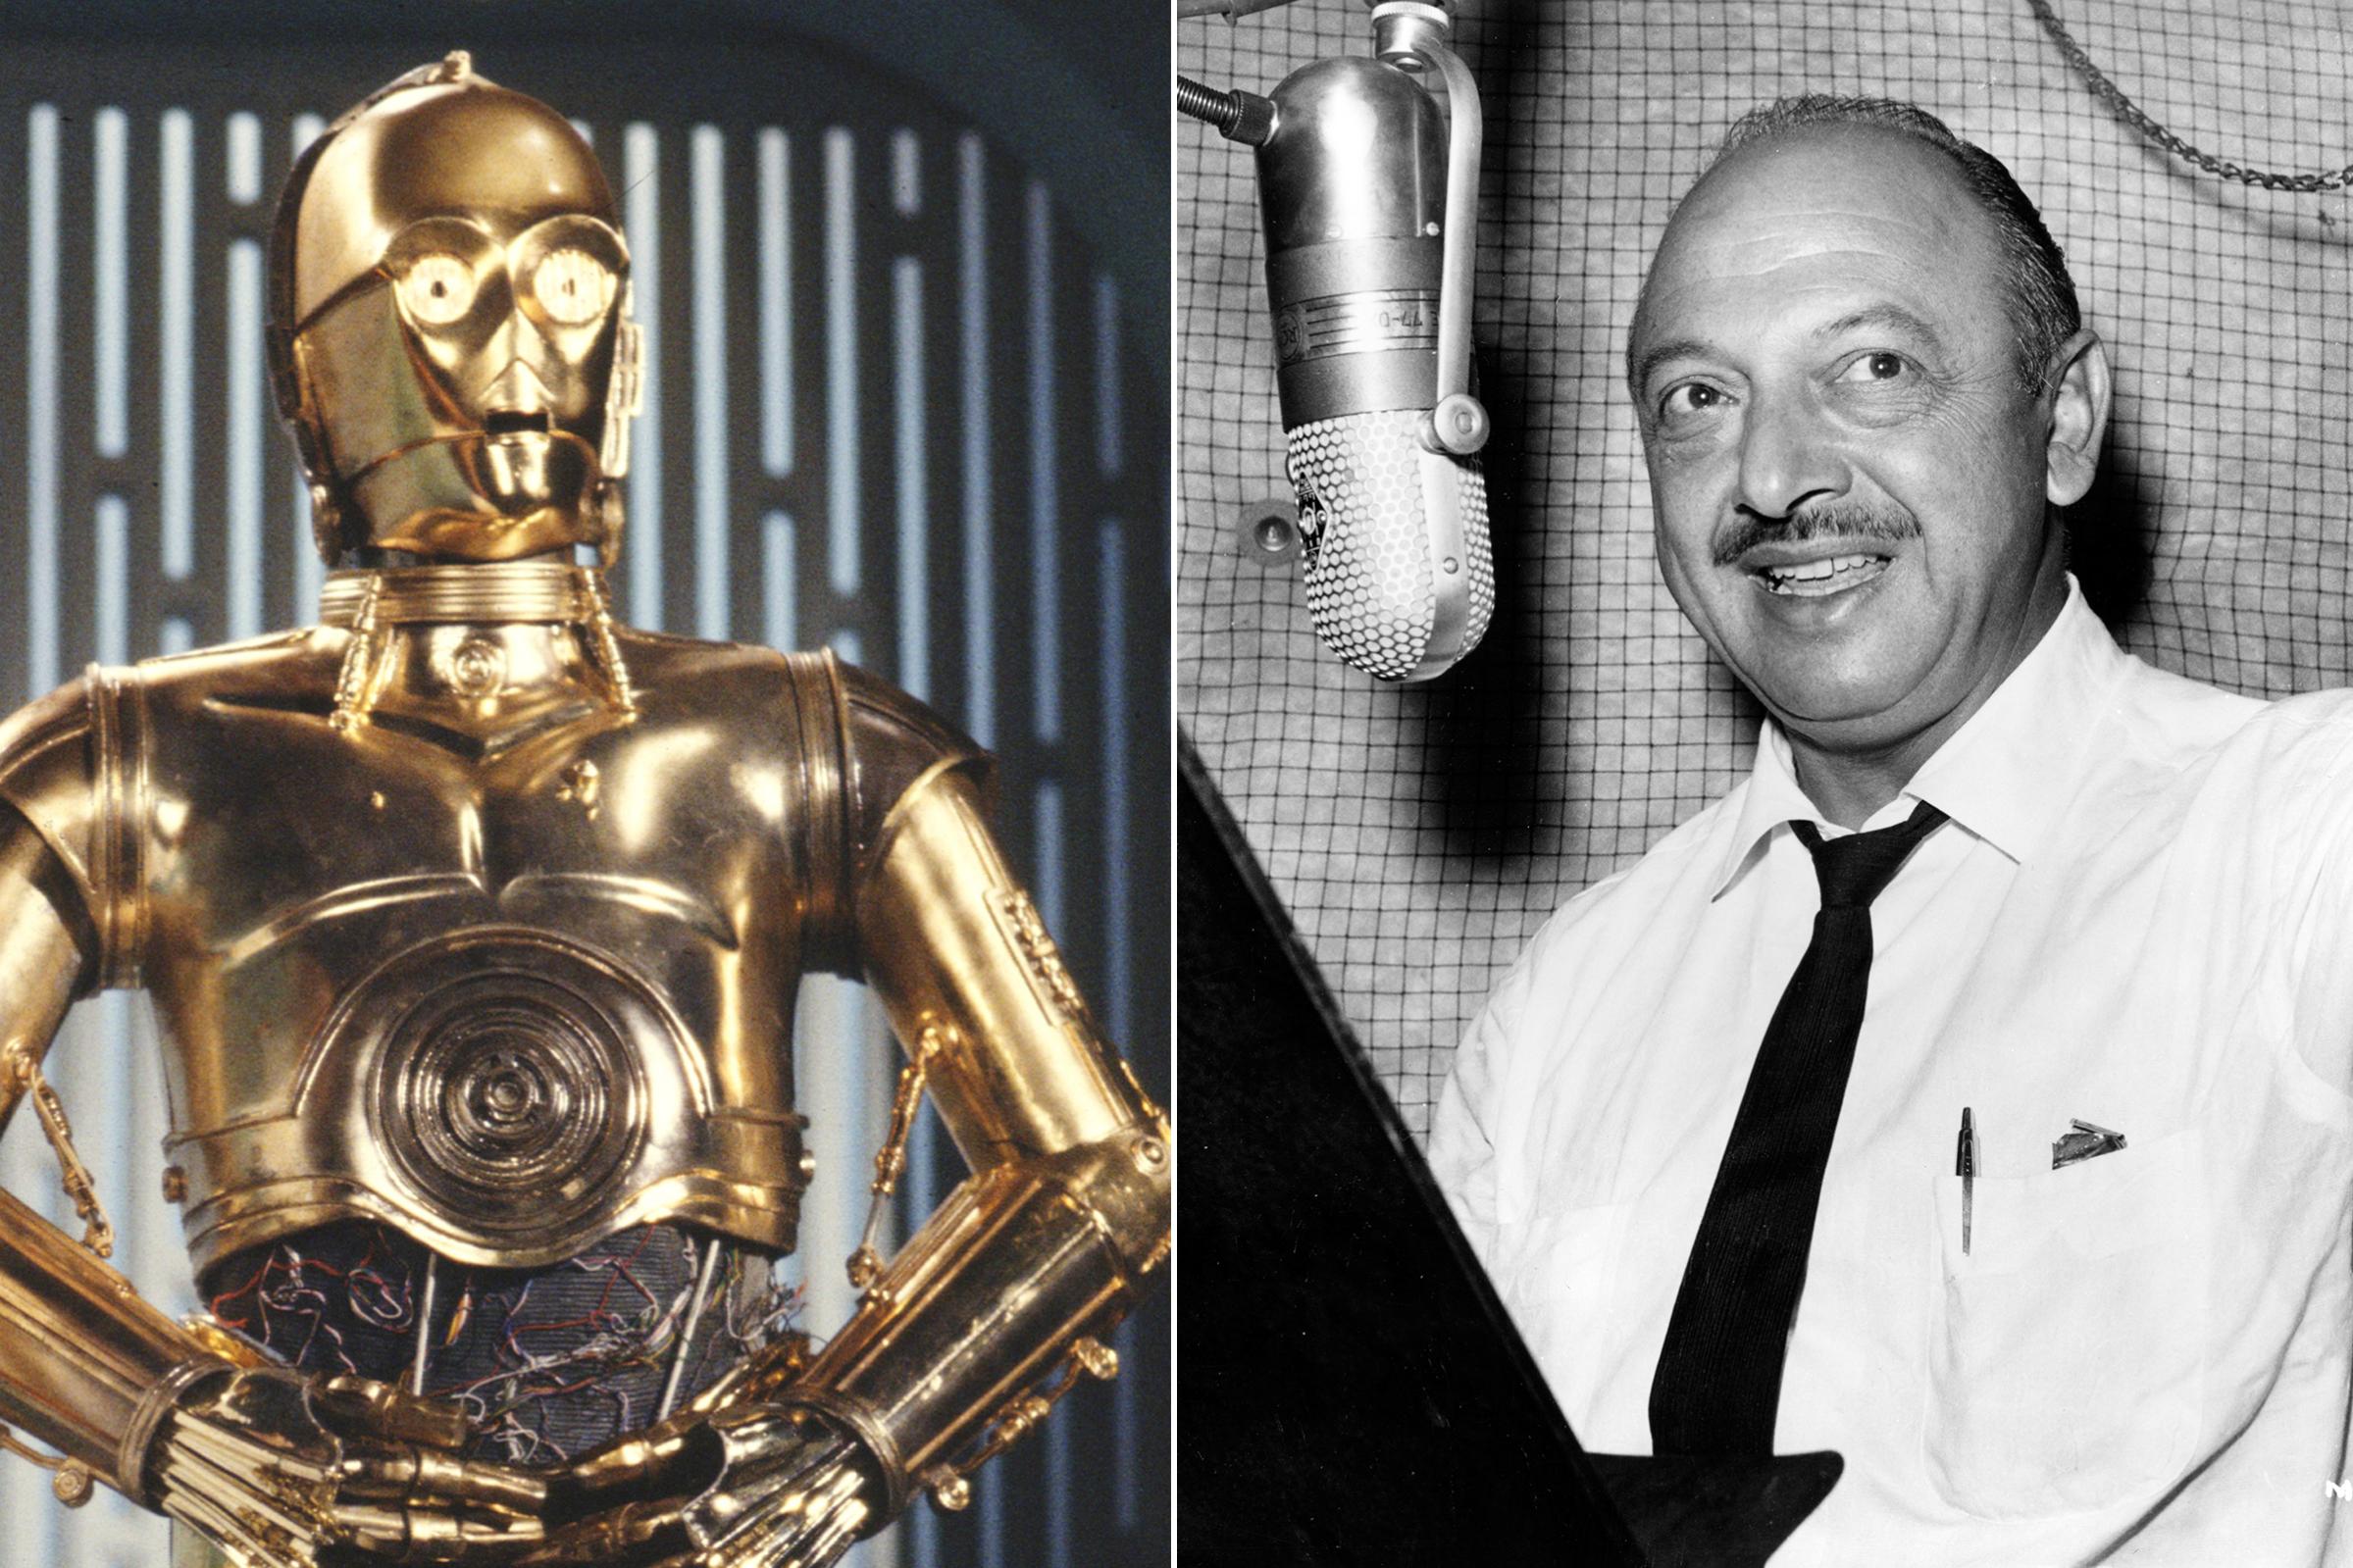 Mel Blanc was almost cast as C3PO in Star Wars